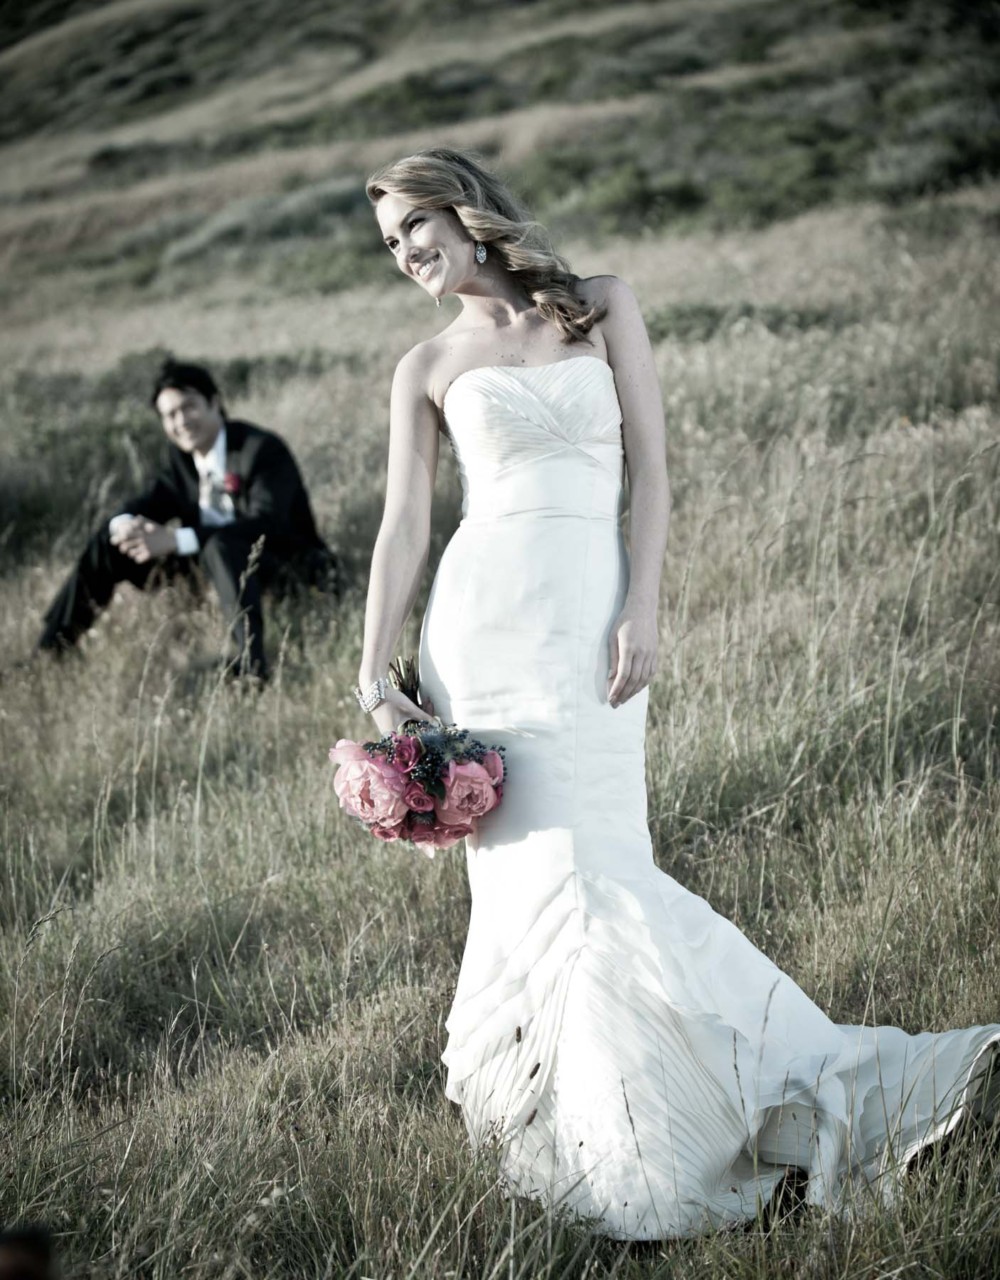 Looking for a budget wedding photographer in Alyeska?